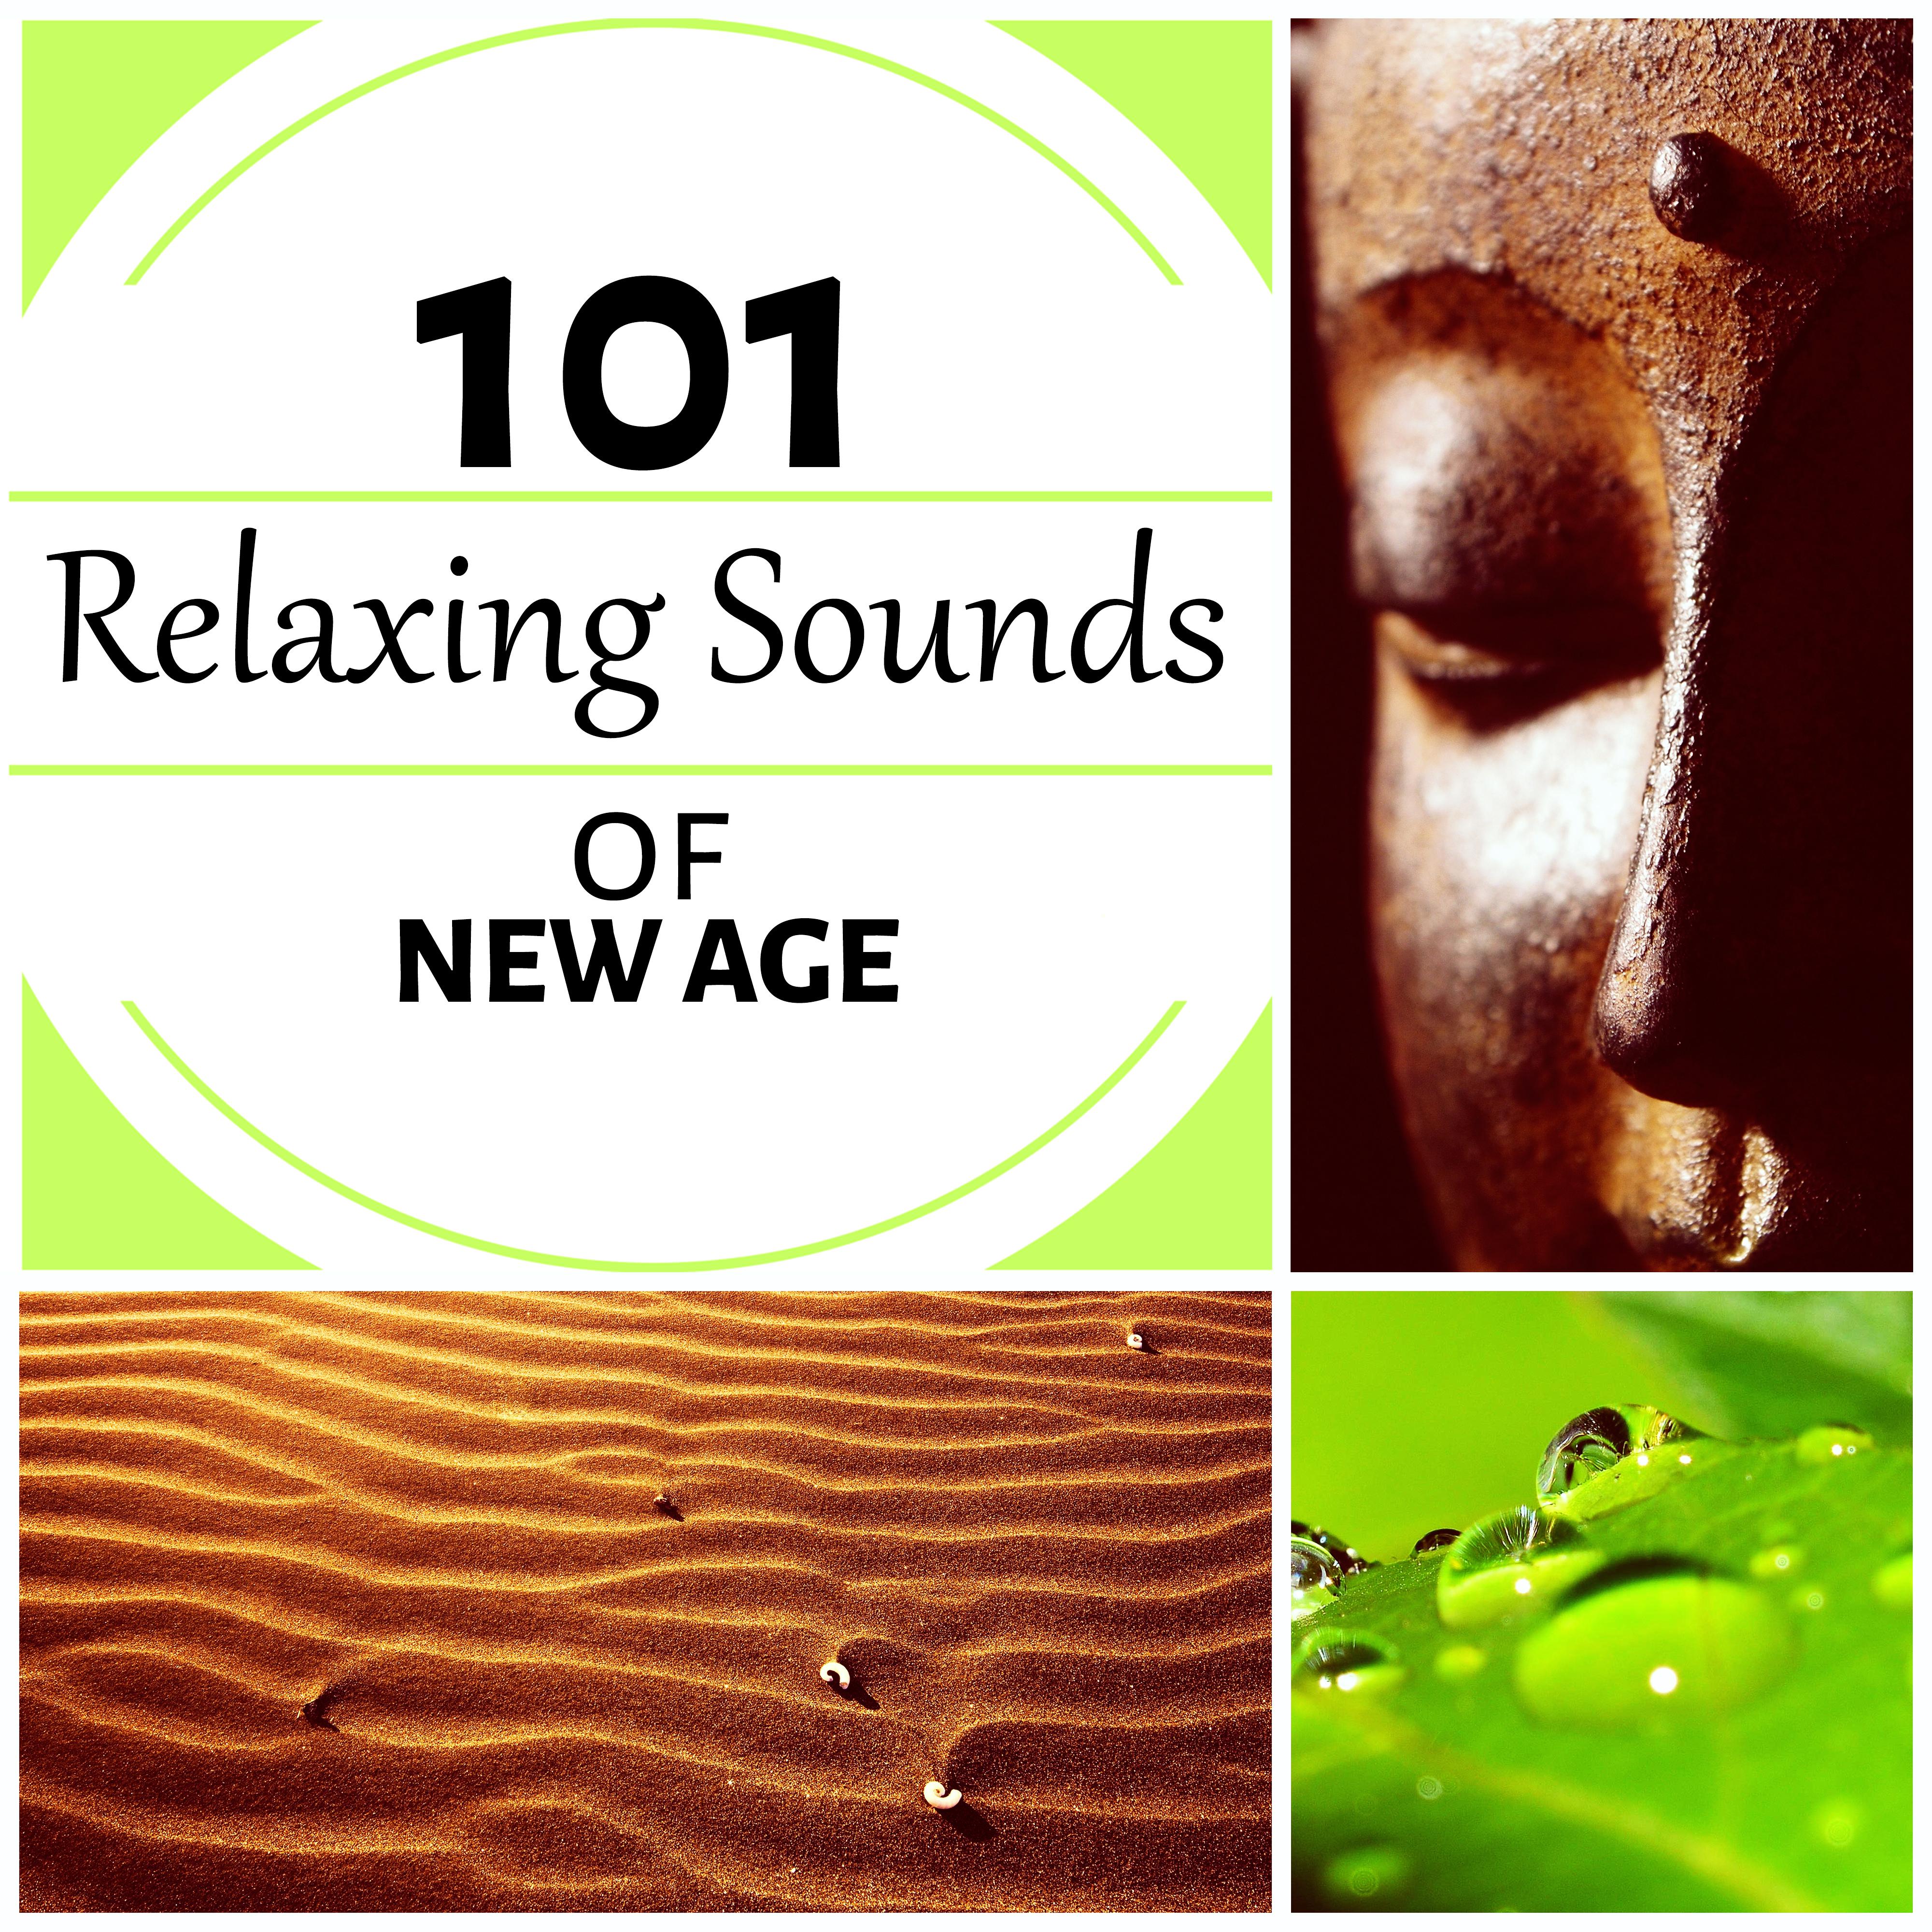 Relaxing Sounds of New Age 101 - Healing Affirmations, Mindfulness and Serenity Spa Music, Sleep Deep meditation, Fulfilled Meditation